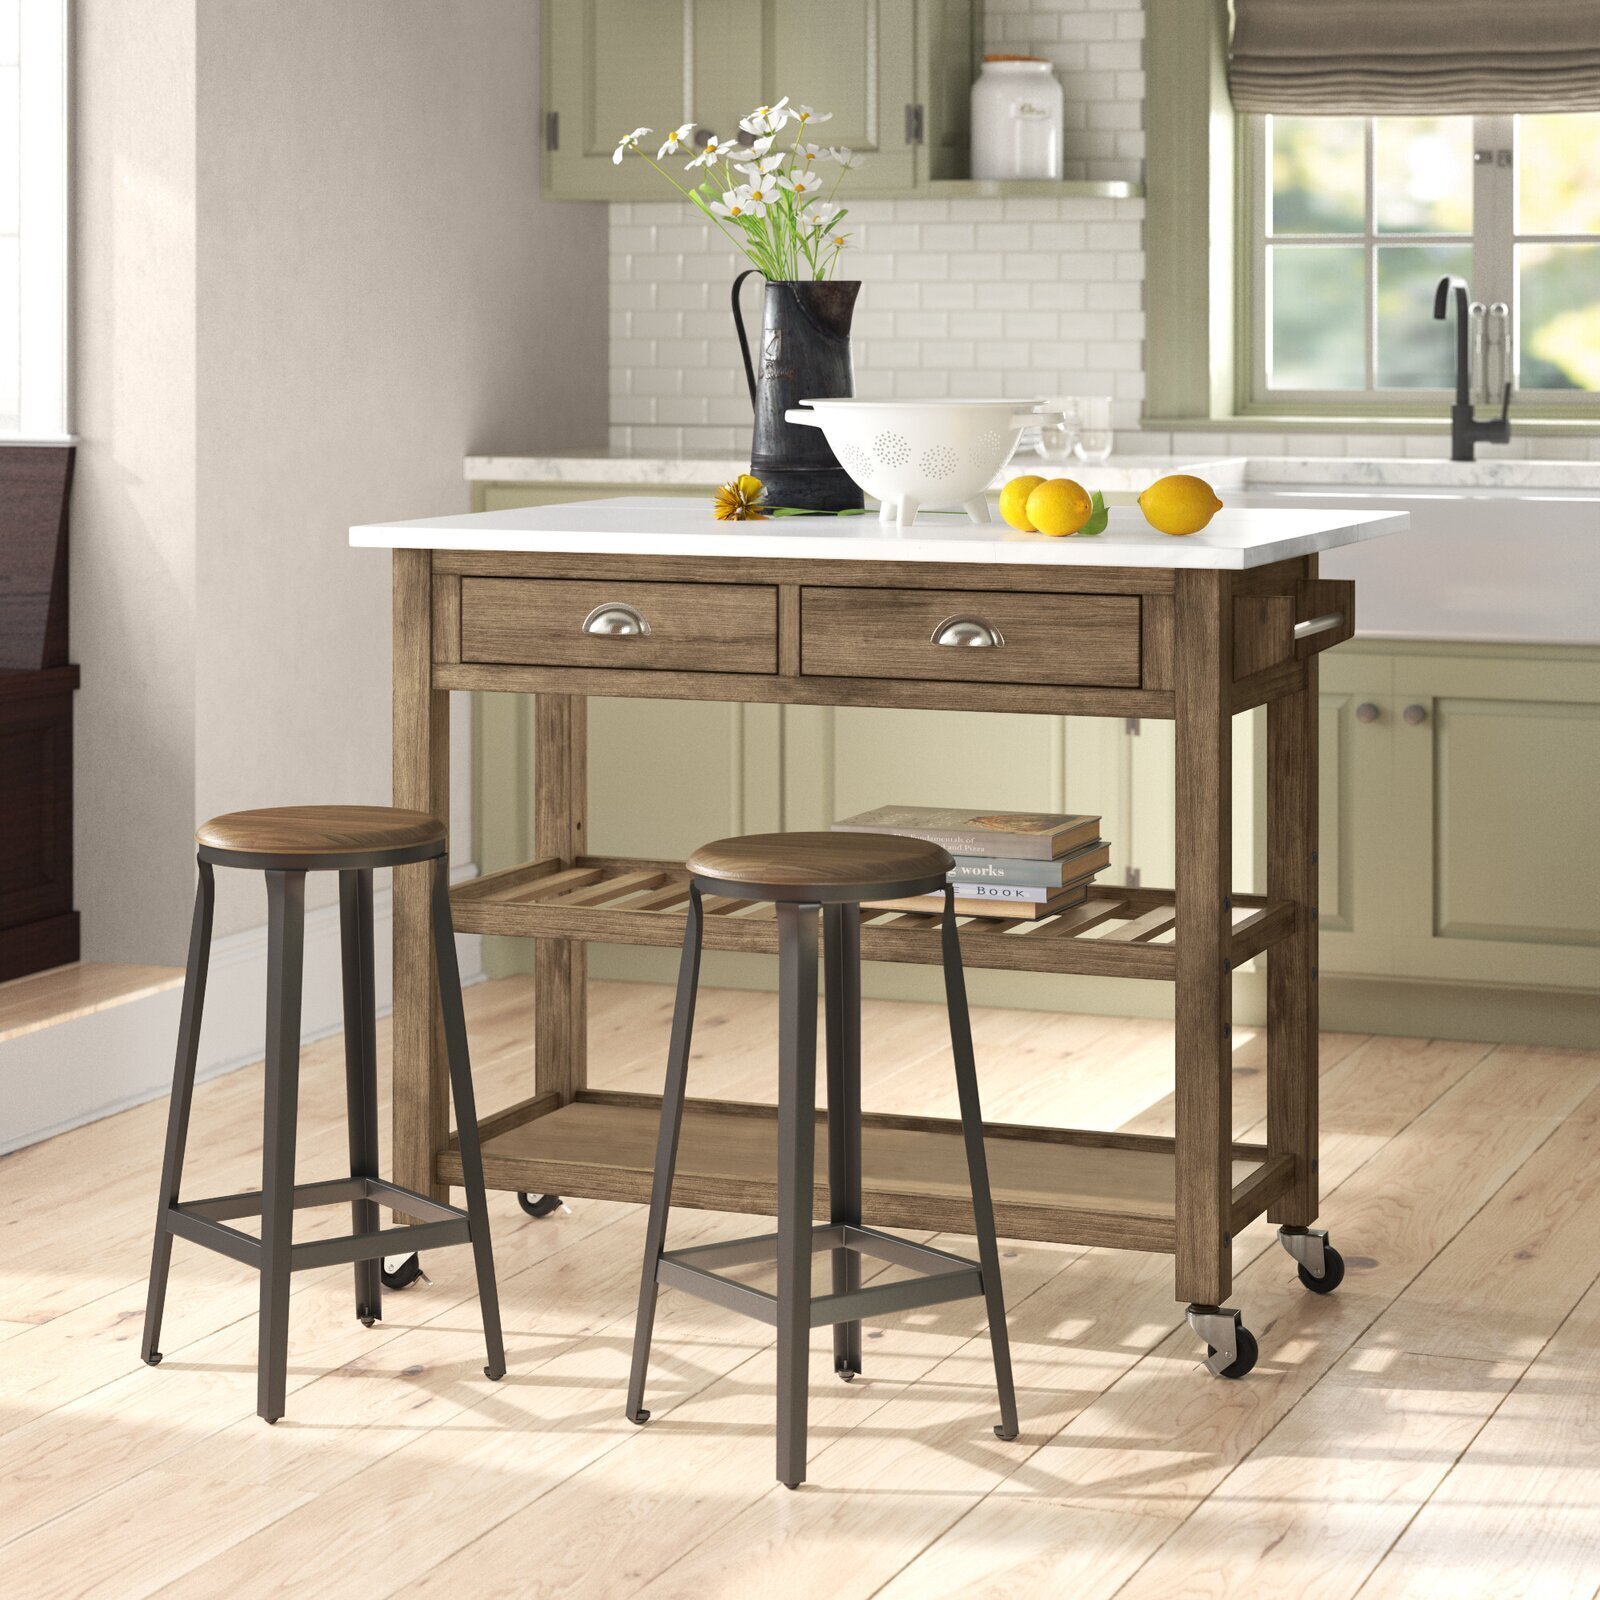 Cart style kitchen island with metal top